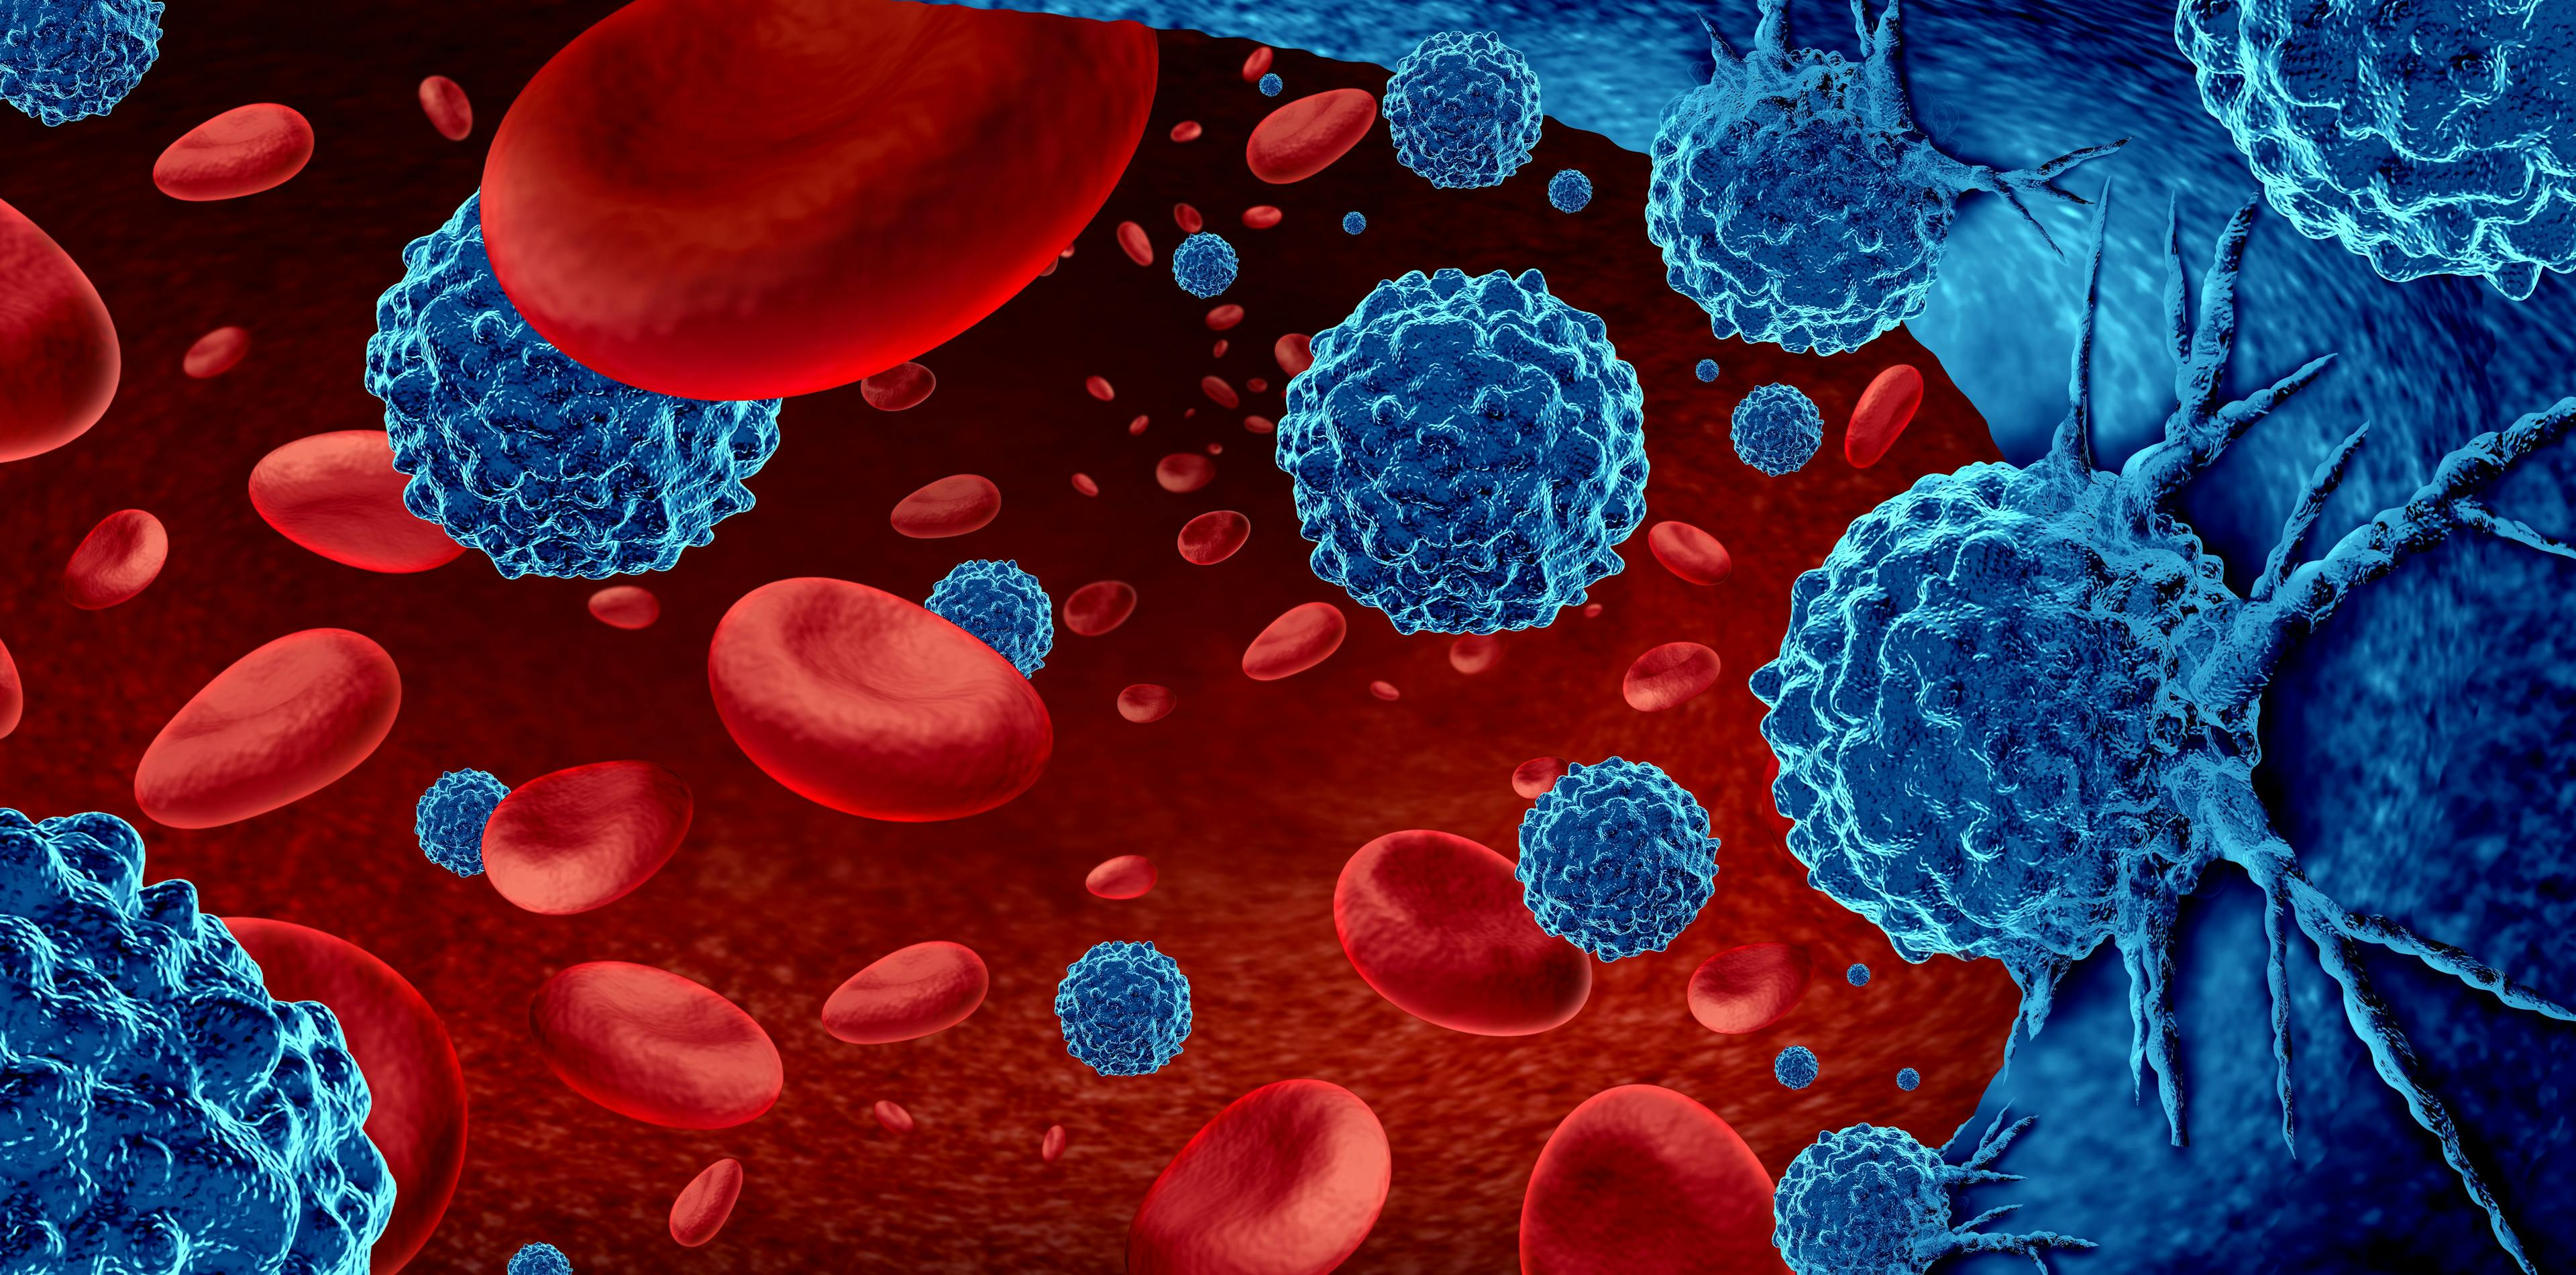 Cancer in the blood outbreak and treatment for malignant cells in a human body caused by carcinogens and genetics with a cancerous cell as an immunotherapy and leukemia or lymphoma symbol and medical | Image Credit: © freshidea -www.stock.adobe.com